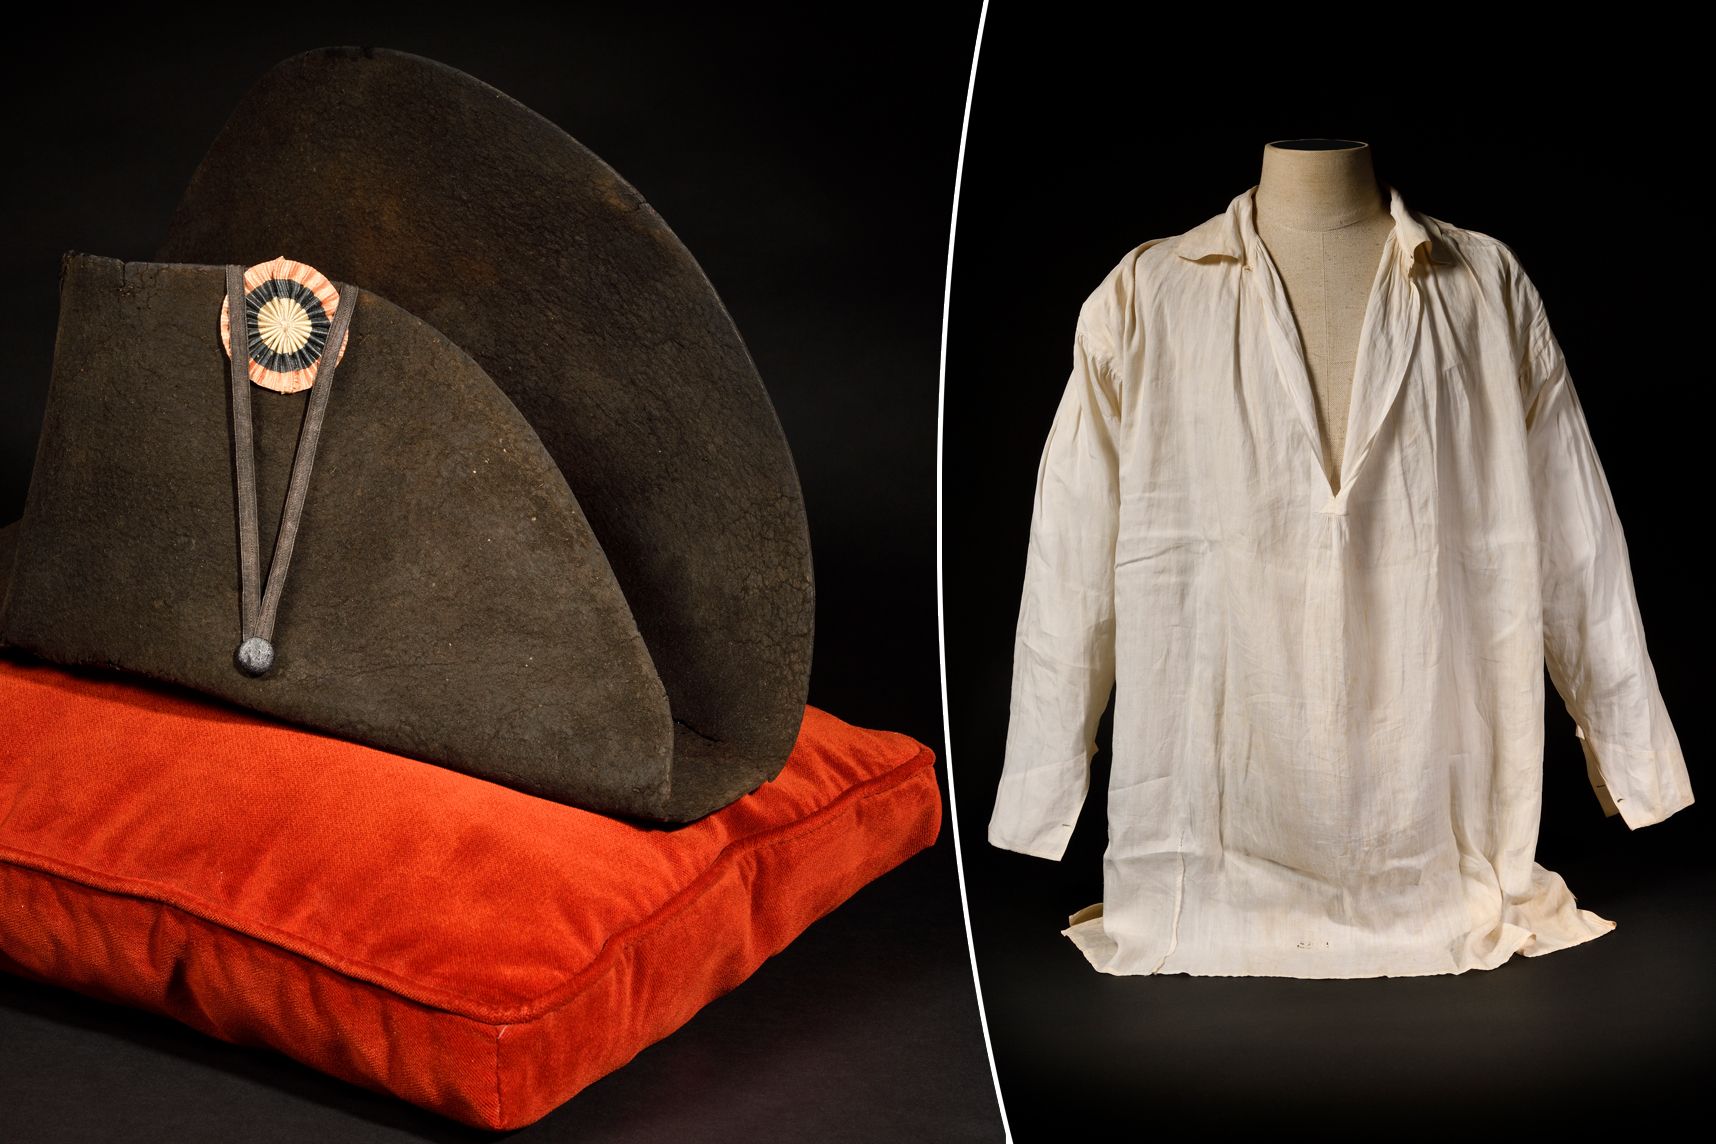 One of his iconic hats, but also Napoleon's shirt in the auction